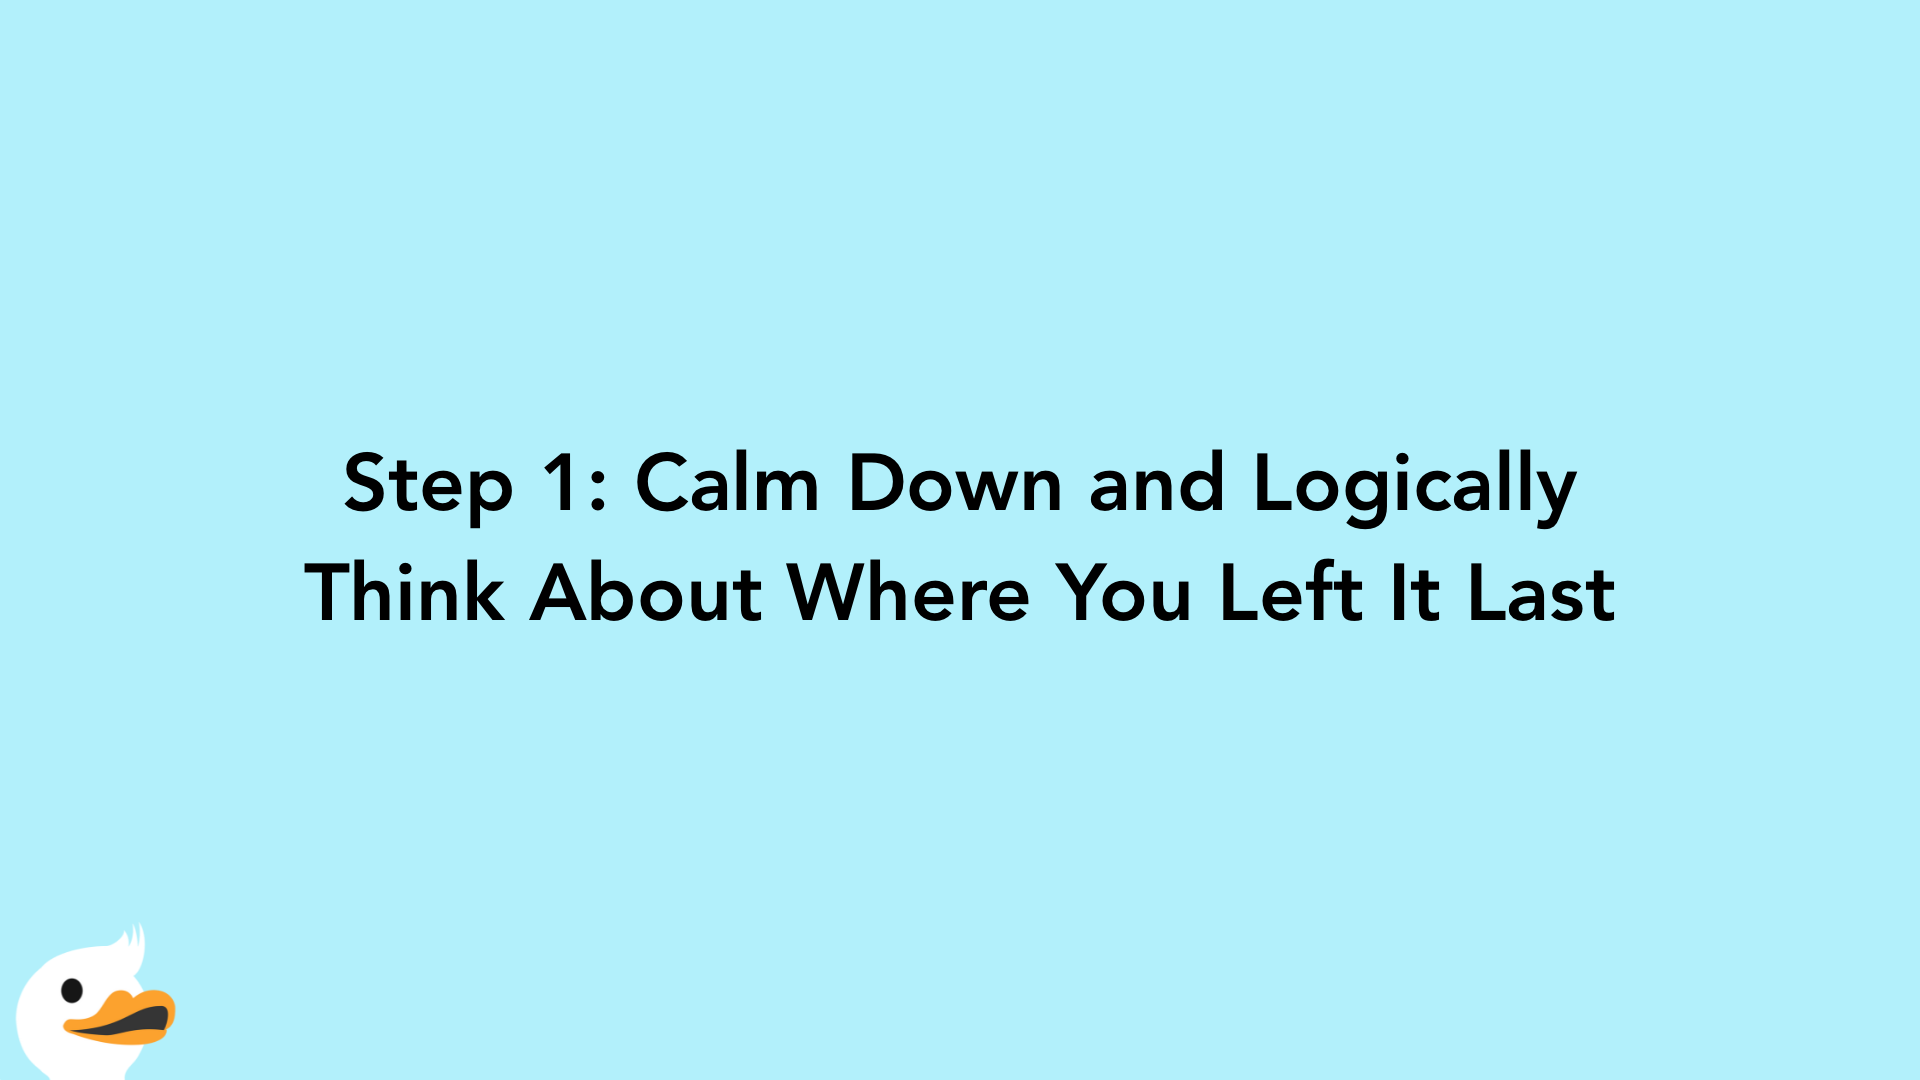 Step 1: Calm Down and Logically Think About Where You Left It Last